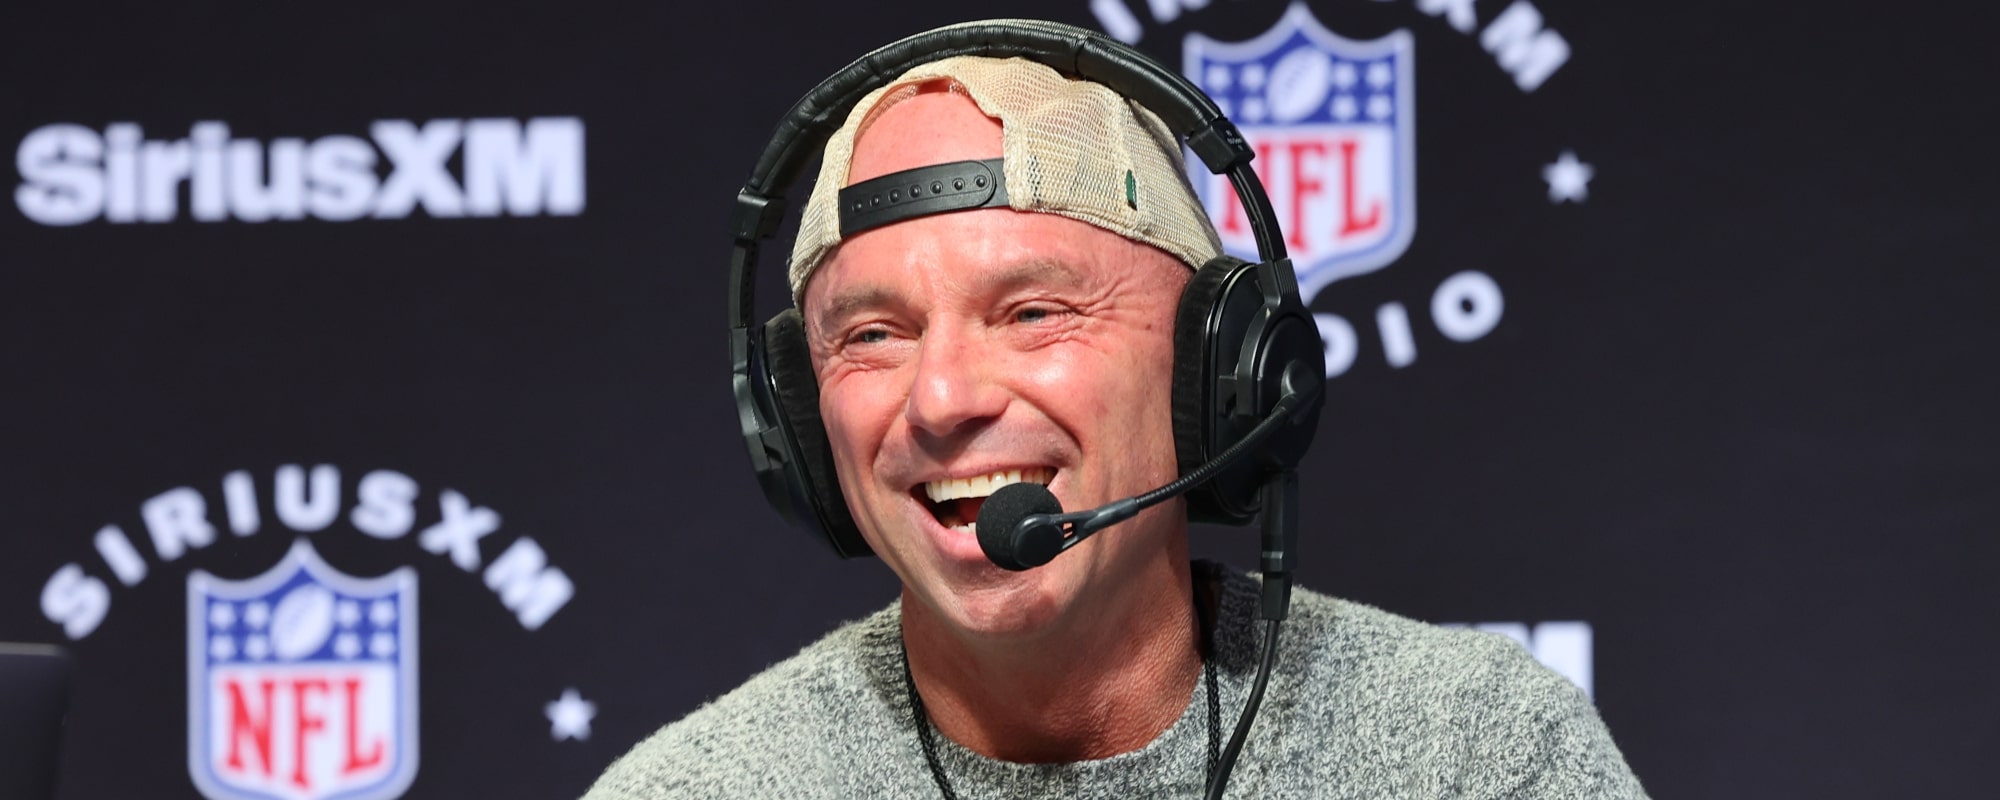 Kenny Chesney Explains the Importance of Having Fun While on Tour & Leaving His Ego on Stage